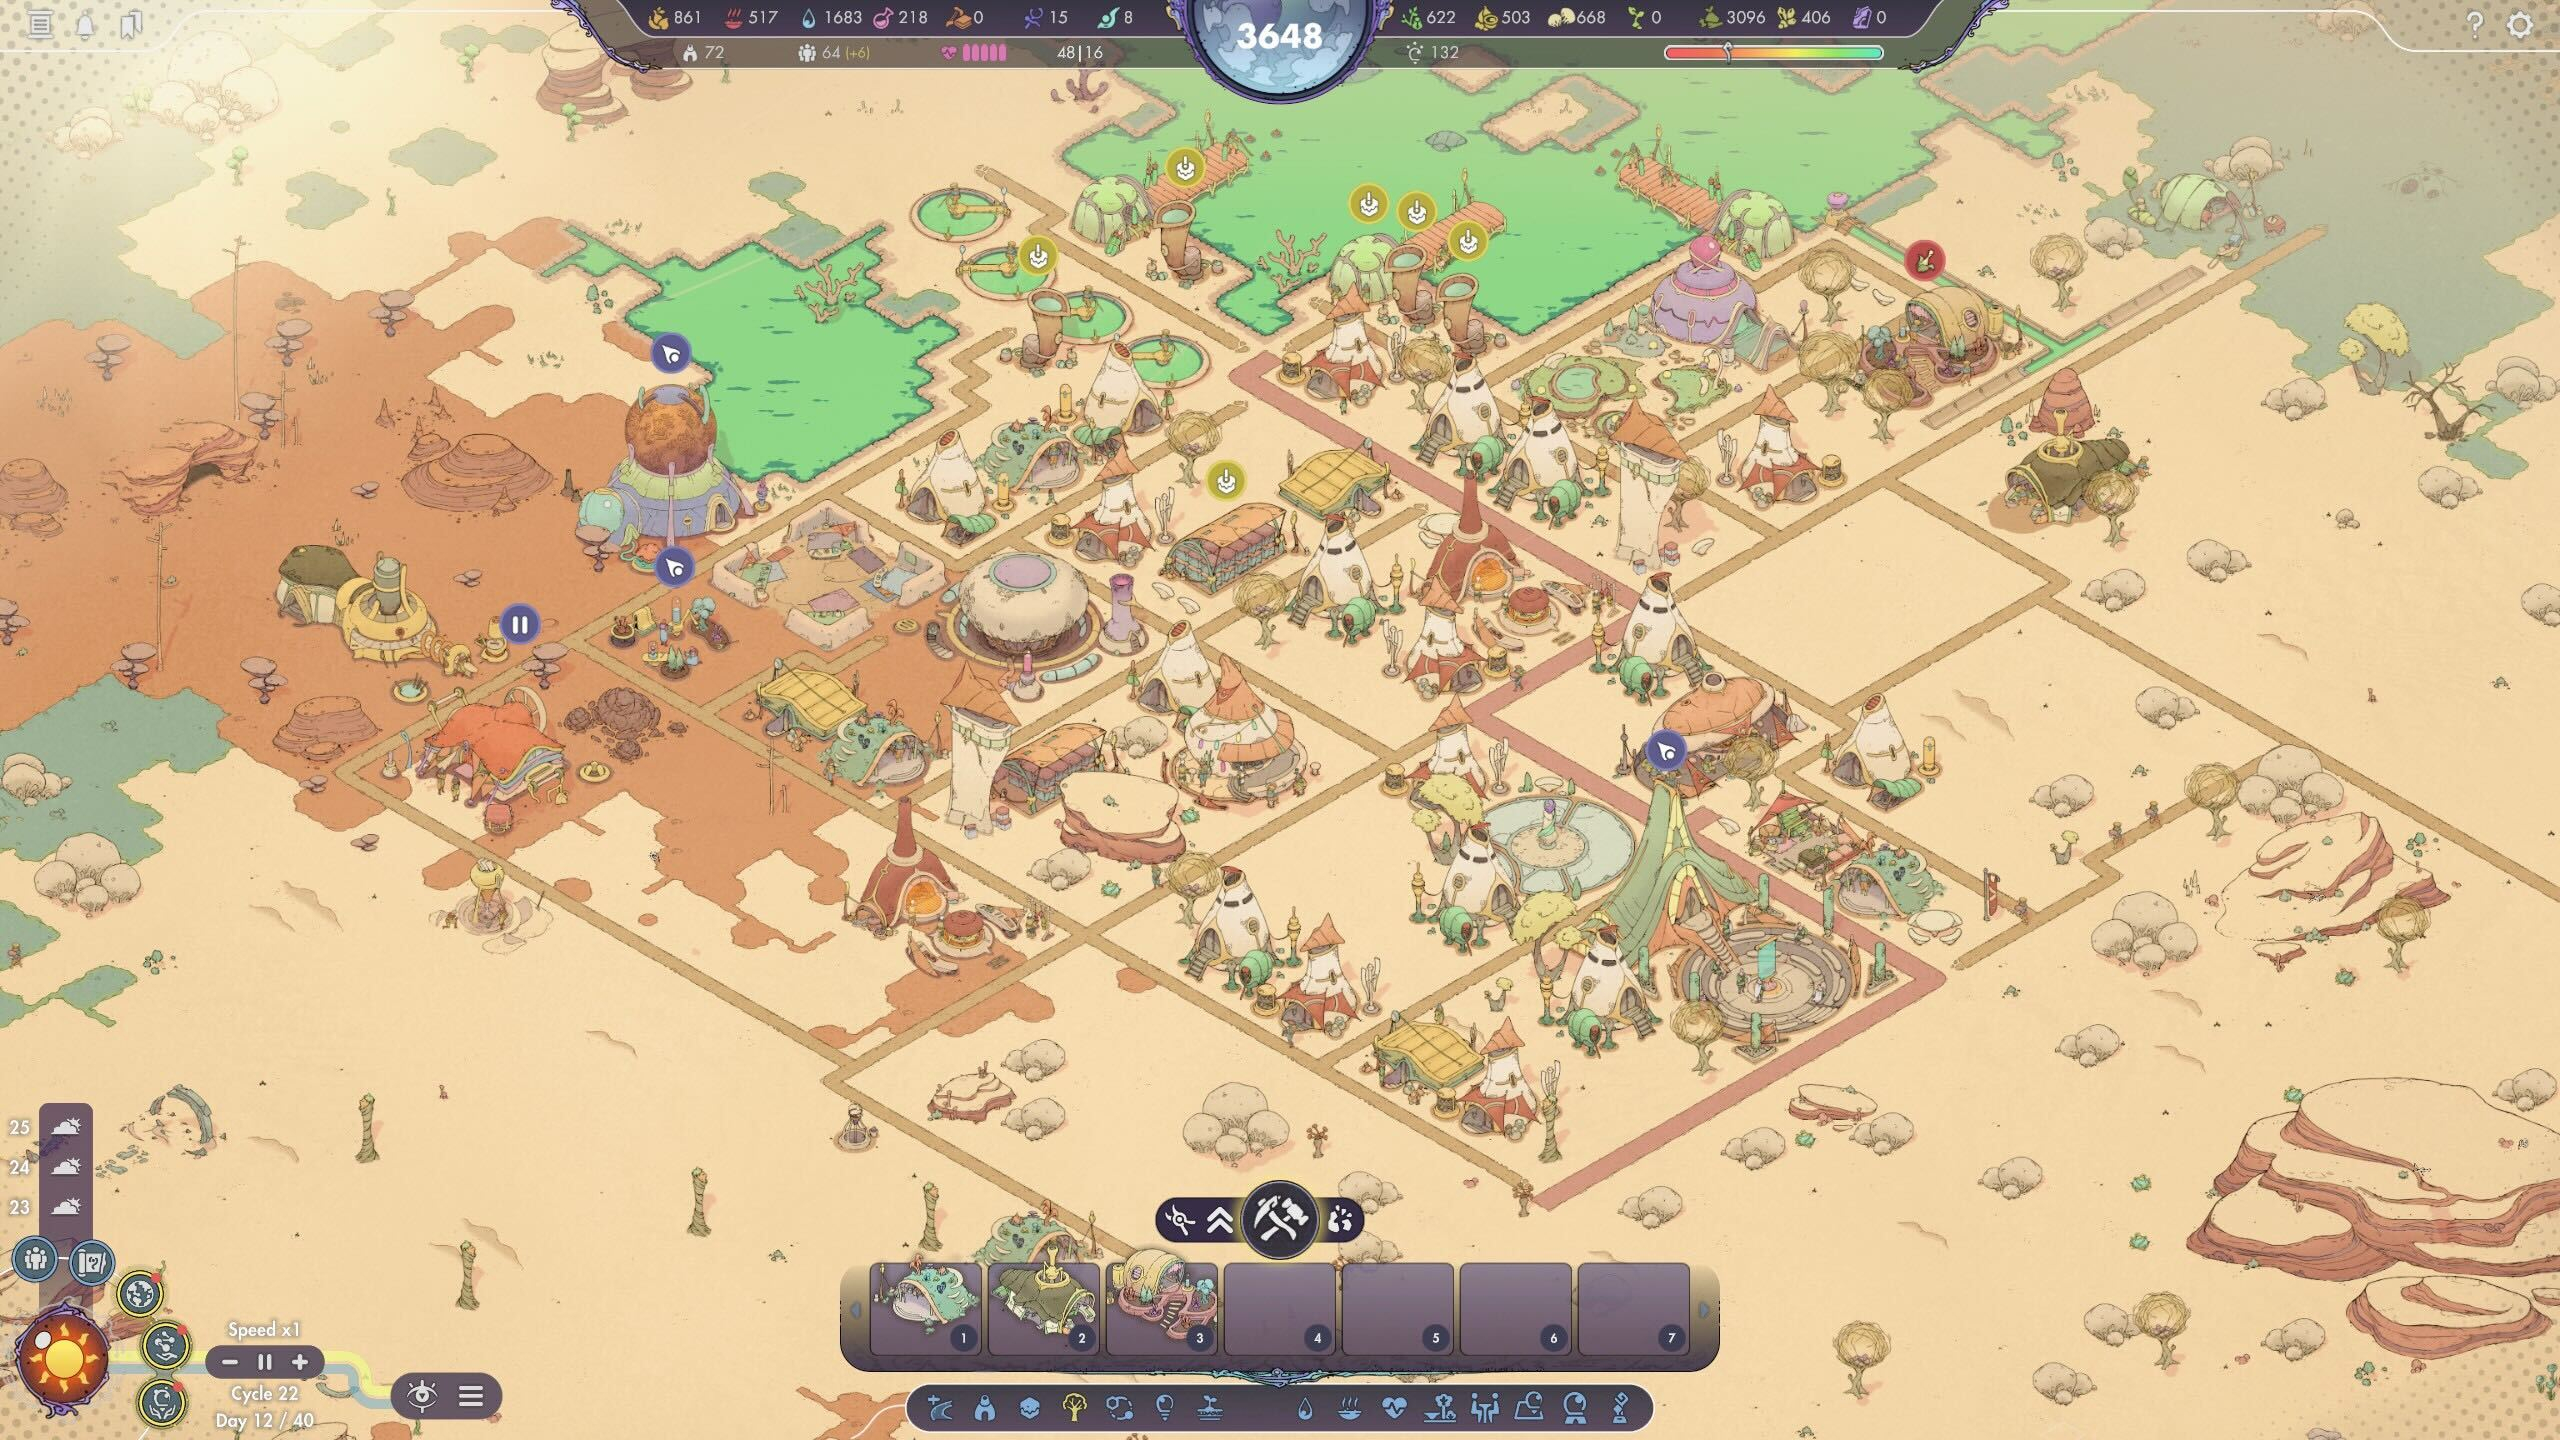 View of the entire desert city